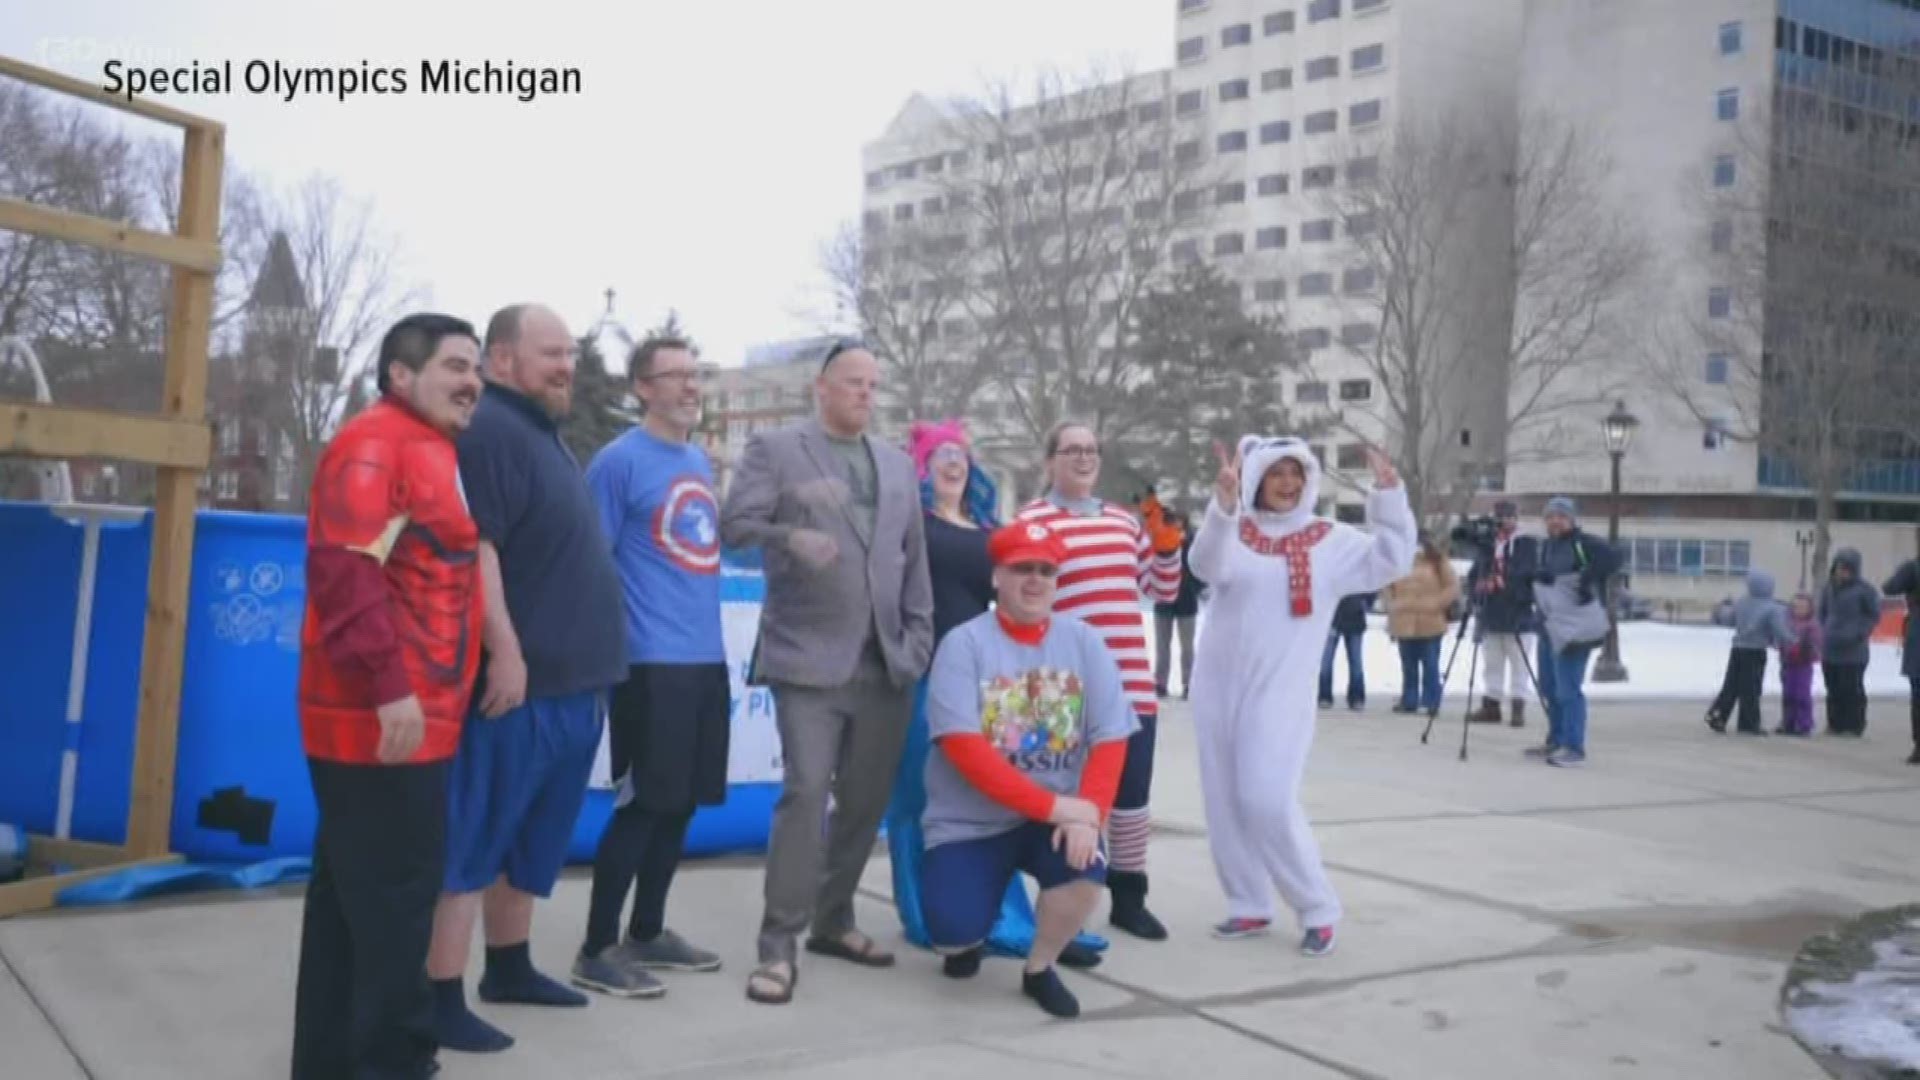 The Legislative Polar Plunge has raised now raised $259,000 for Special Olympics Michigan in its nine year history.